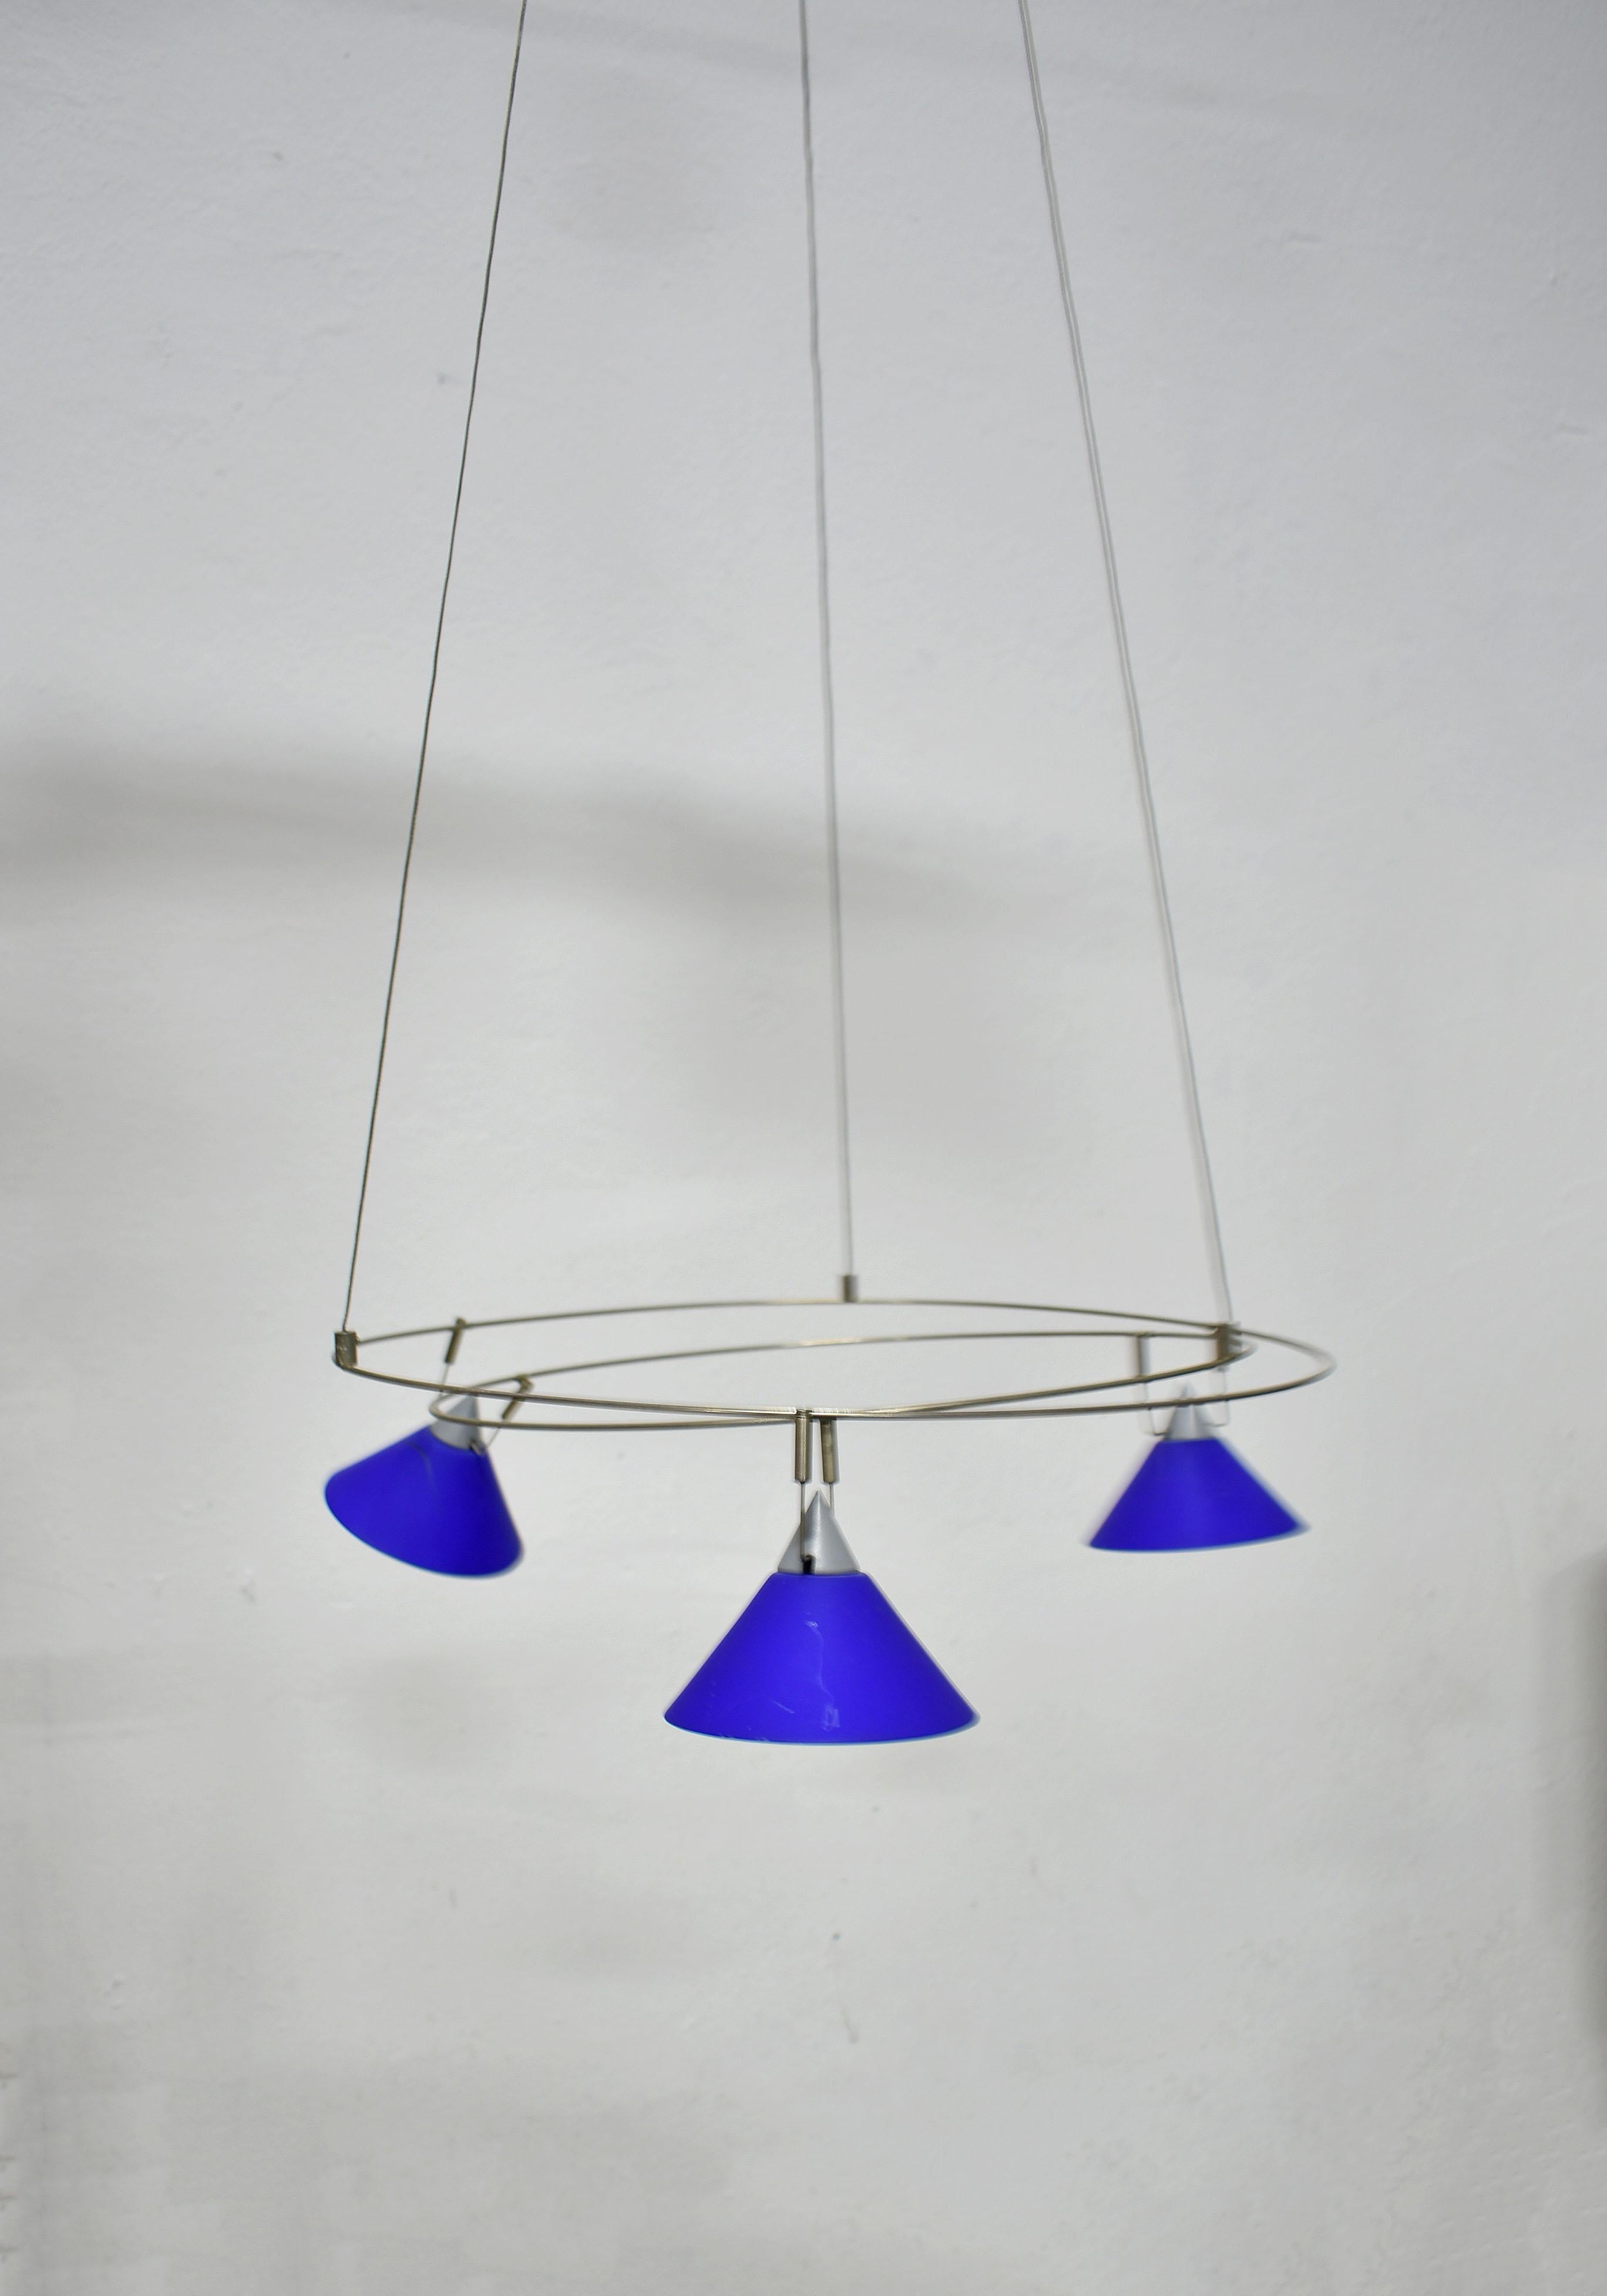 Minimalist chandelier from the postmodern era, Germany, 1980s

Unknown manufacturer and designer

This elegant minimalist chandelier features a large metal ceiling rose with an adapter hidden inside and a light-weighted circular hanging